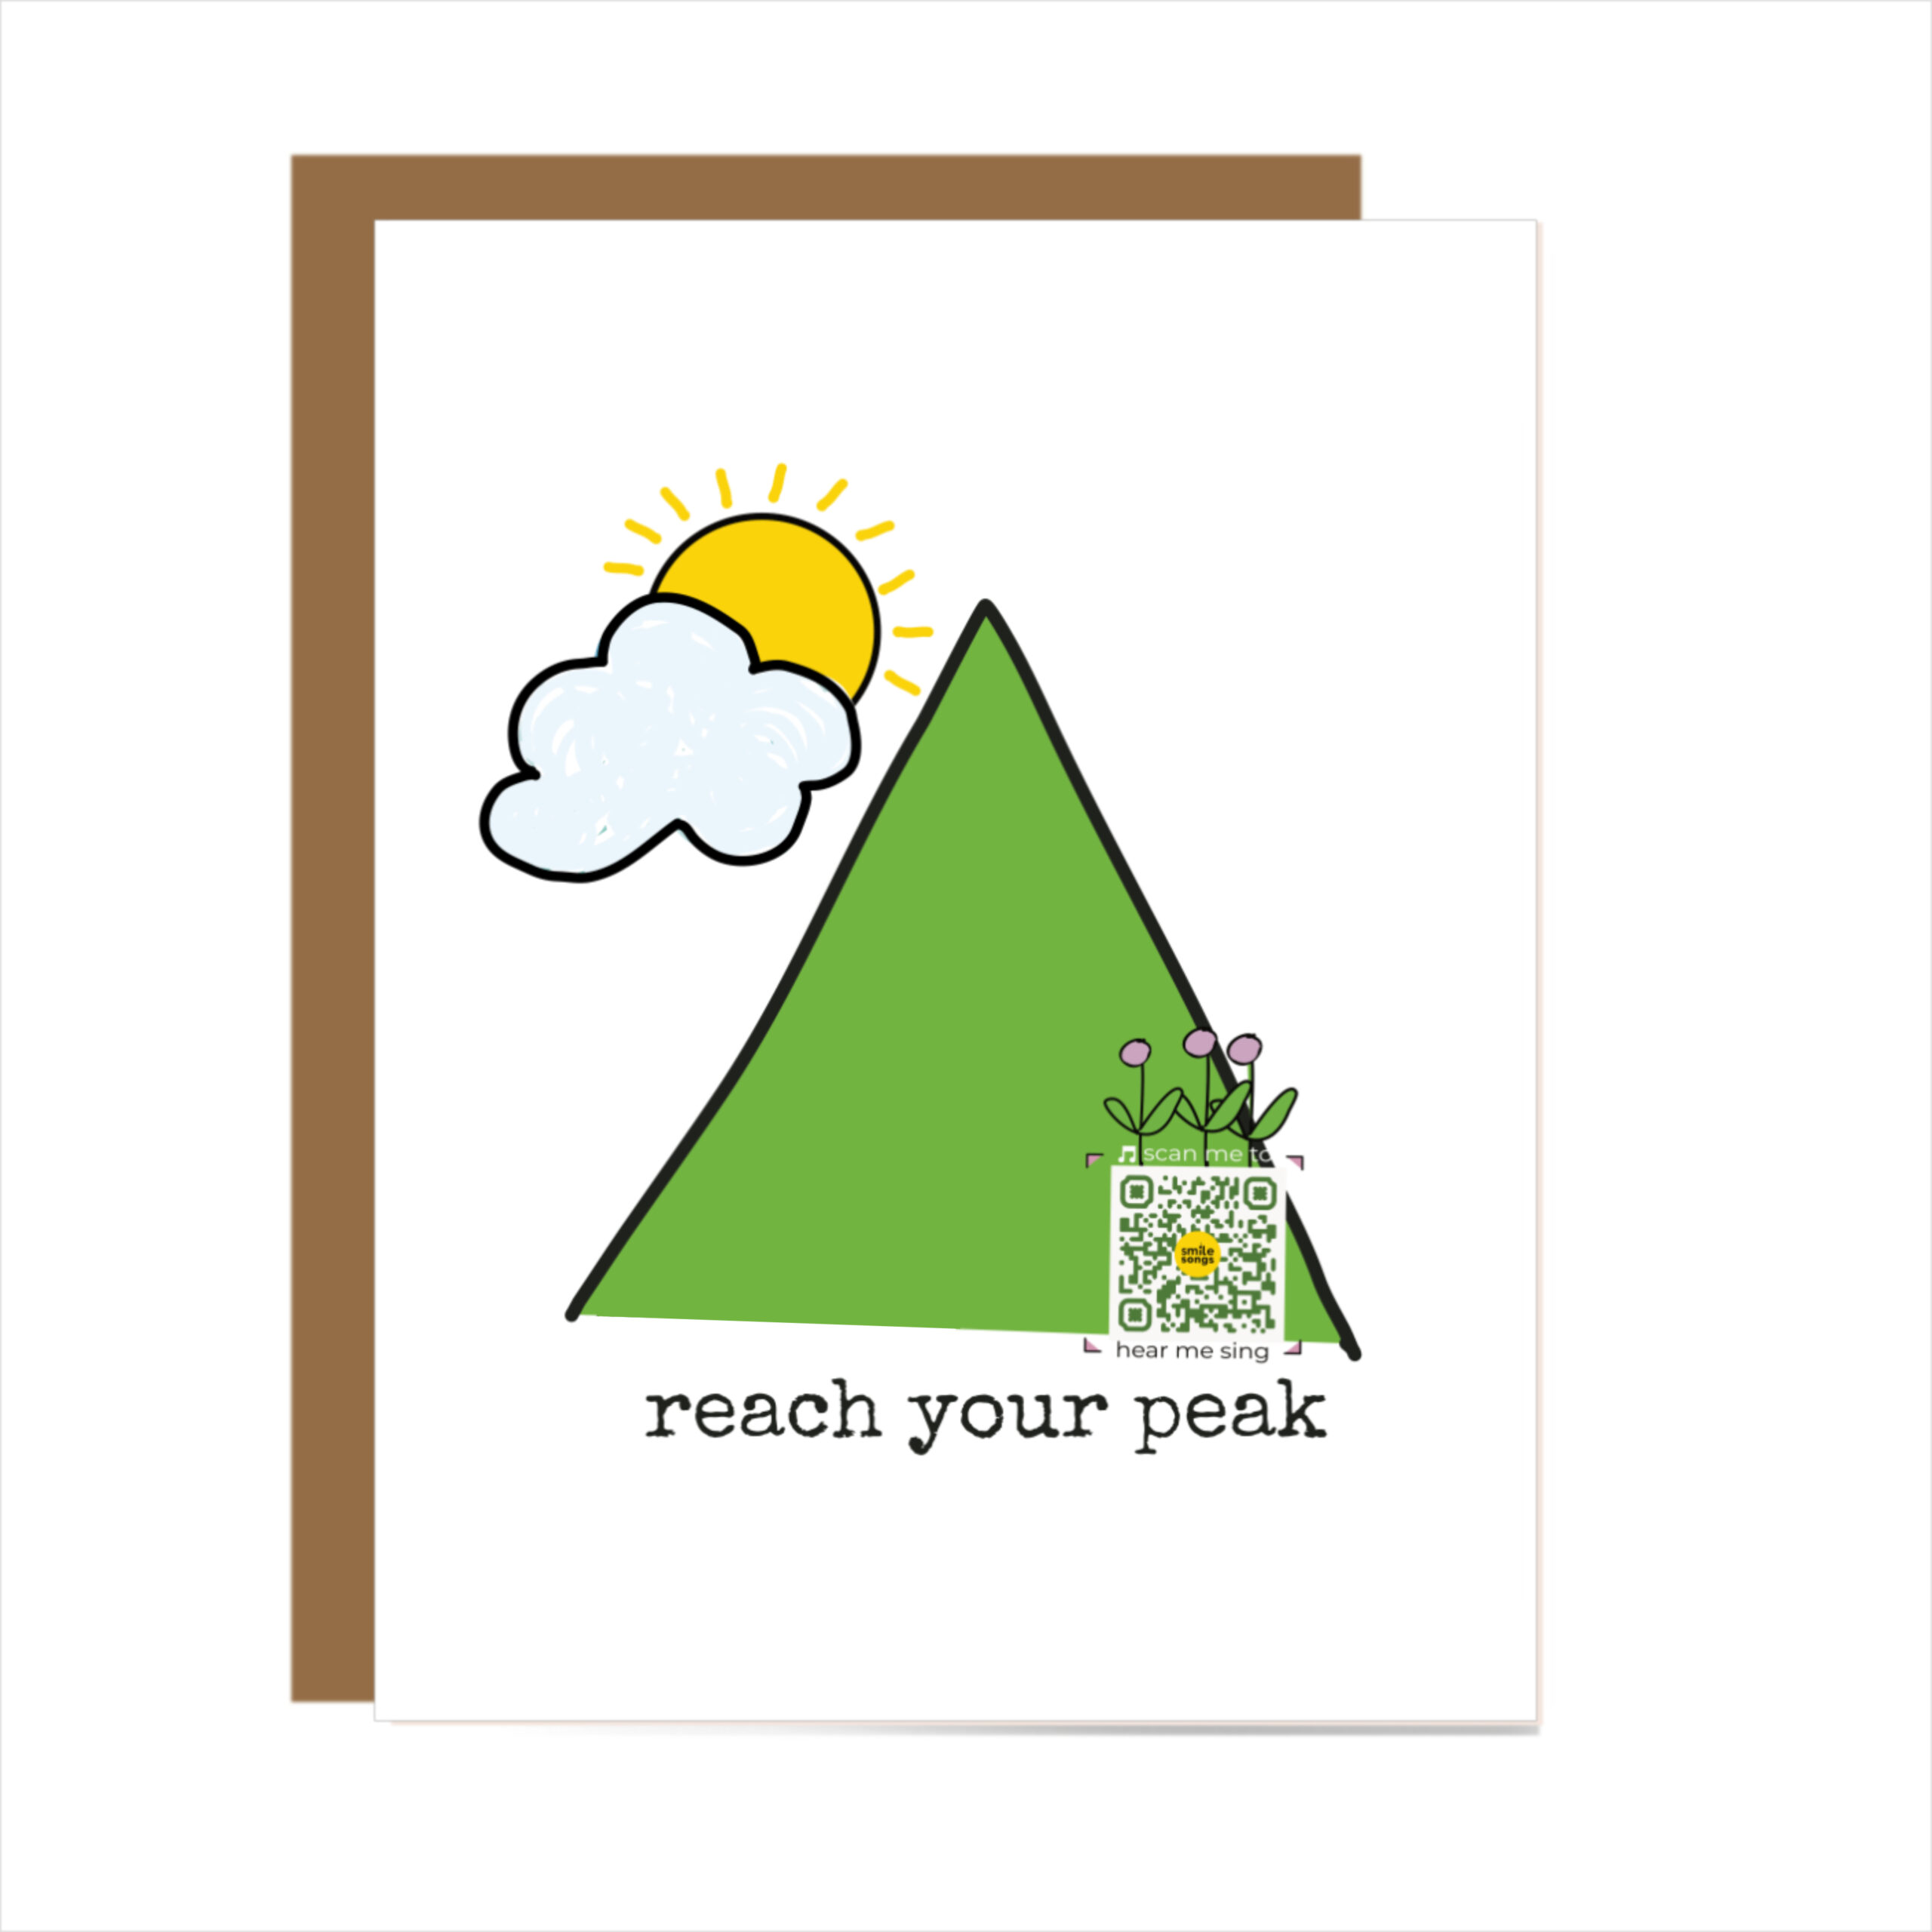 musical greeting card with mountain, sun, cloud and reach your peak typography; QR code plays song